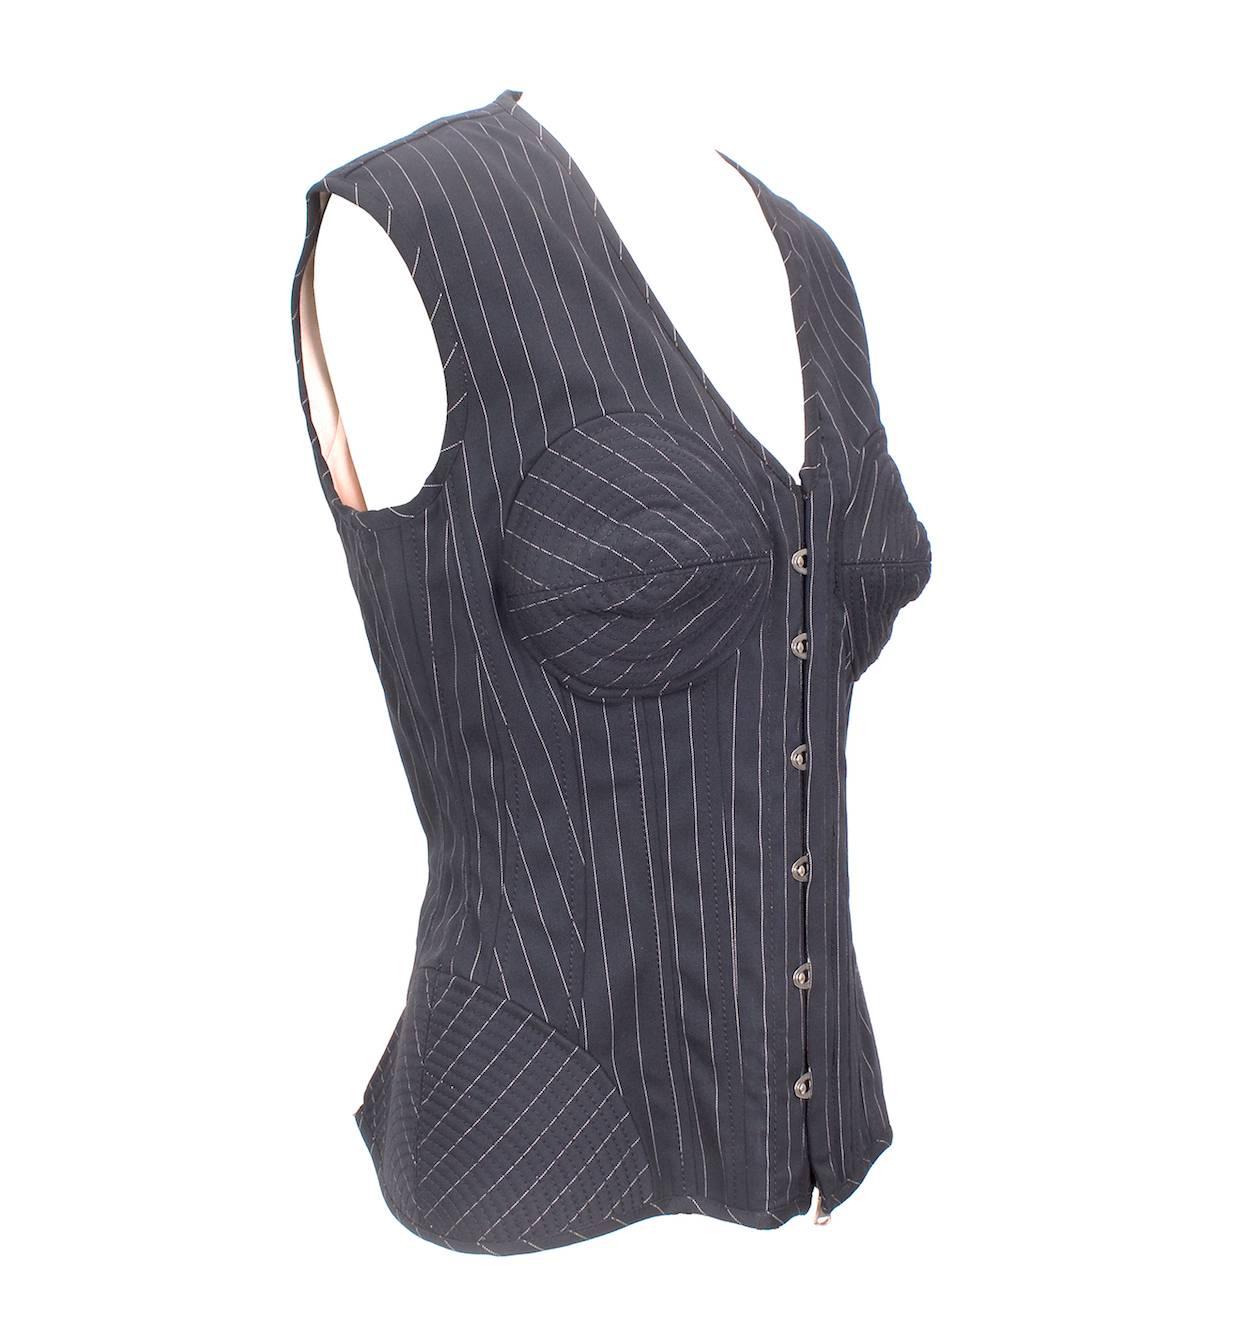 This is a navy pinstripe vest by Jean Paul Gaultier c. late 1980s.  It features a cone bra and structured corset details around the hip.  The closure is latch clasps over a front zipper.  The back is a blush pink stretch material with a cinch strap.